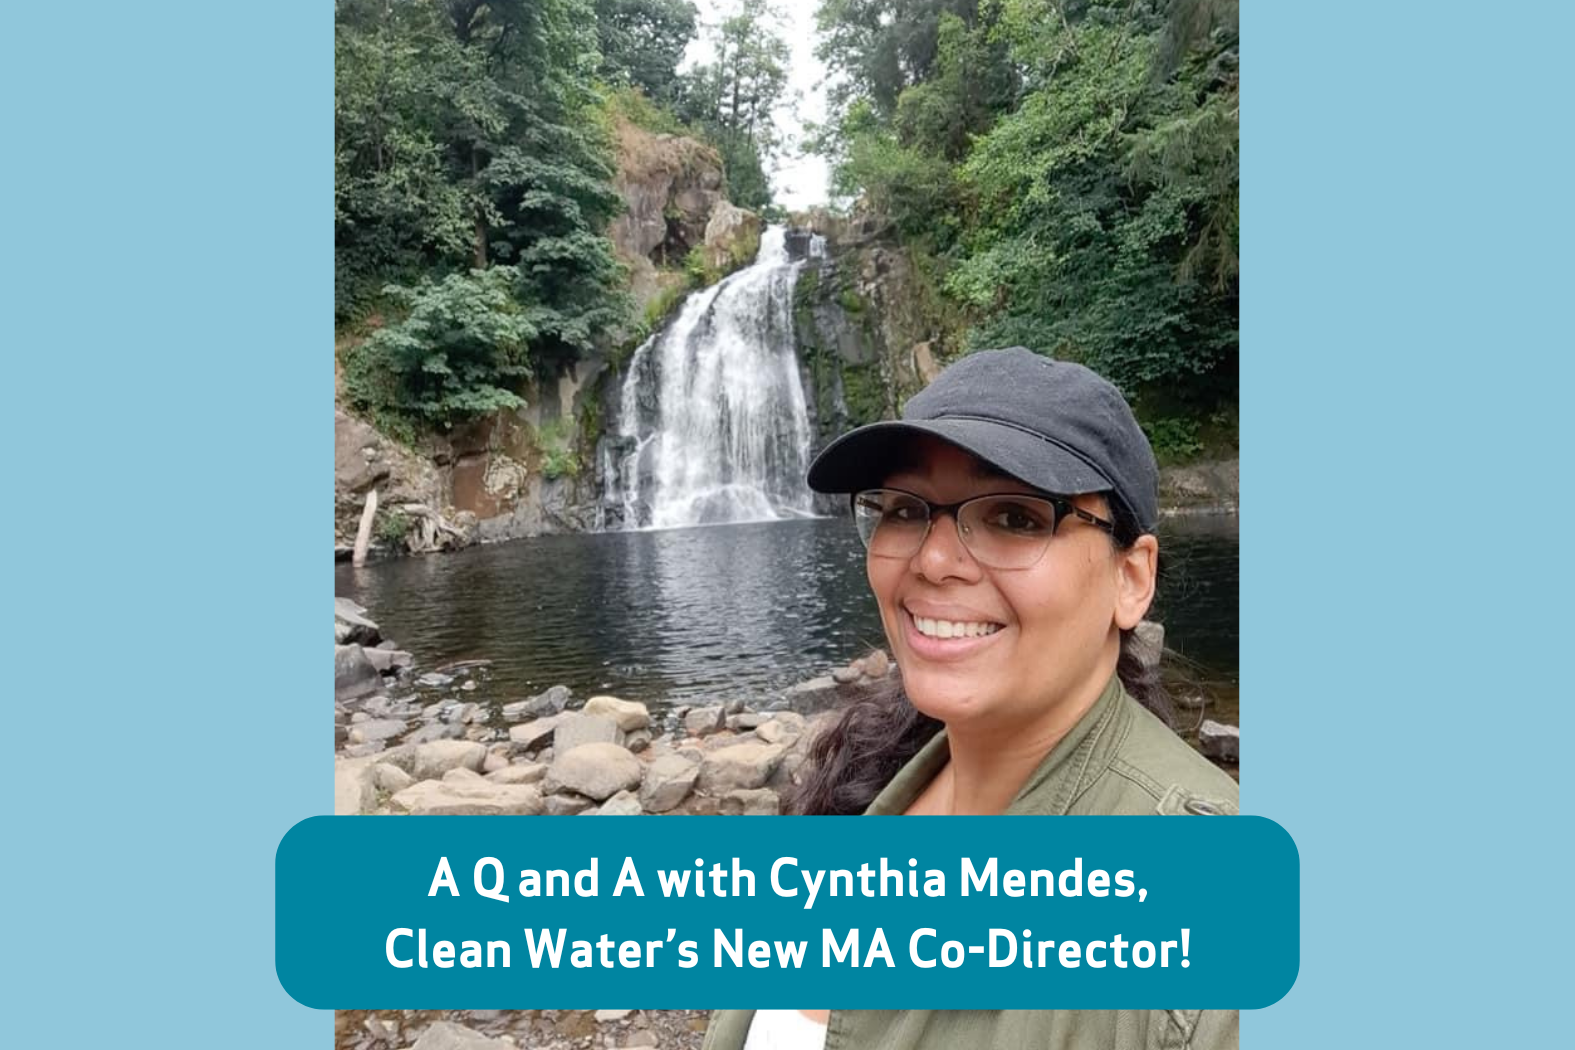 Image of MA state co-director for Clean Water Action, Cynthia Mendes in front of a pretty waterfall